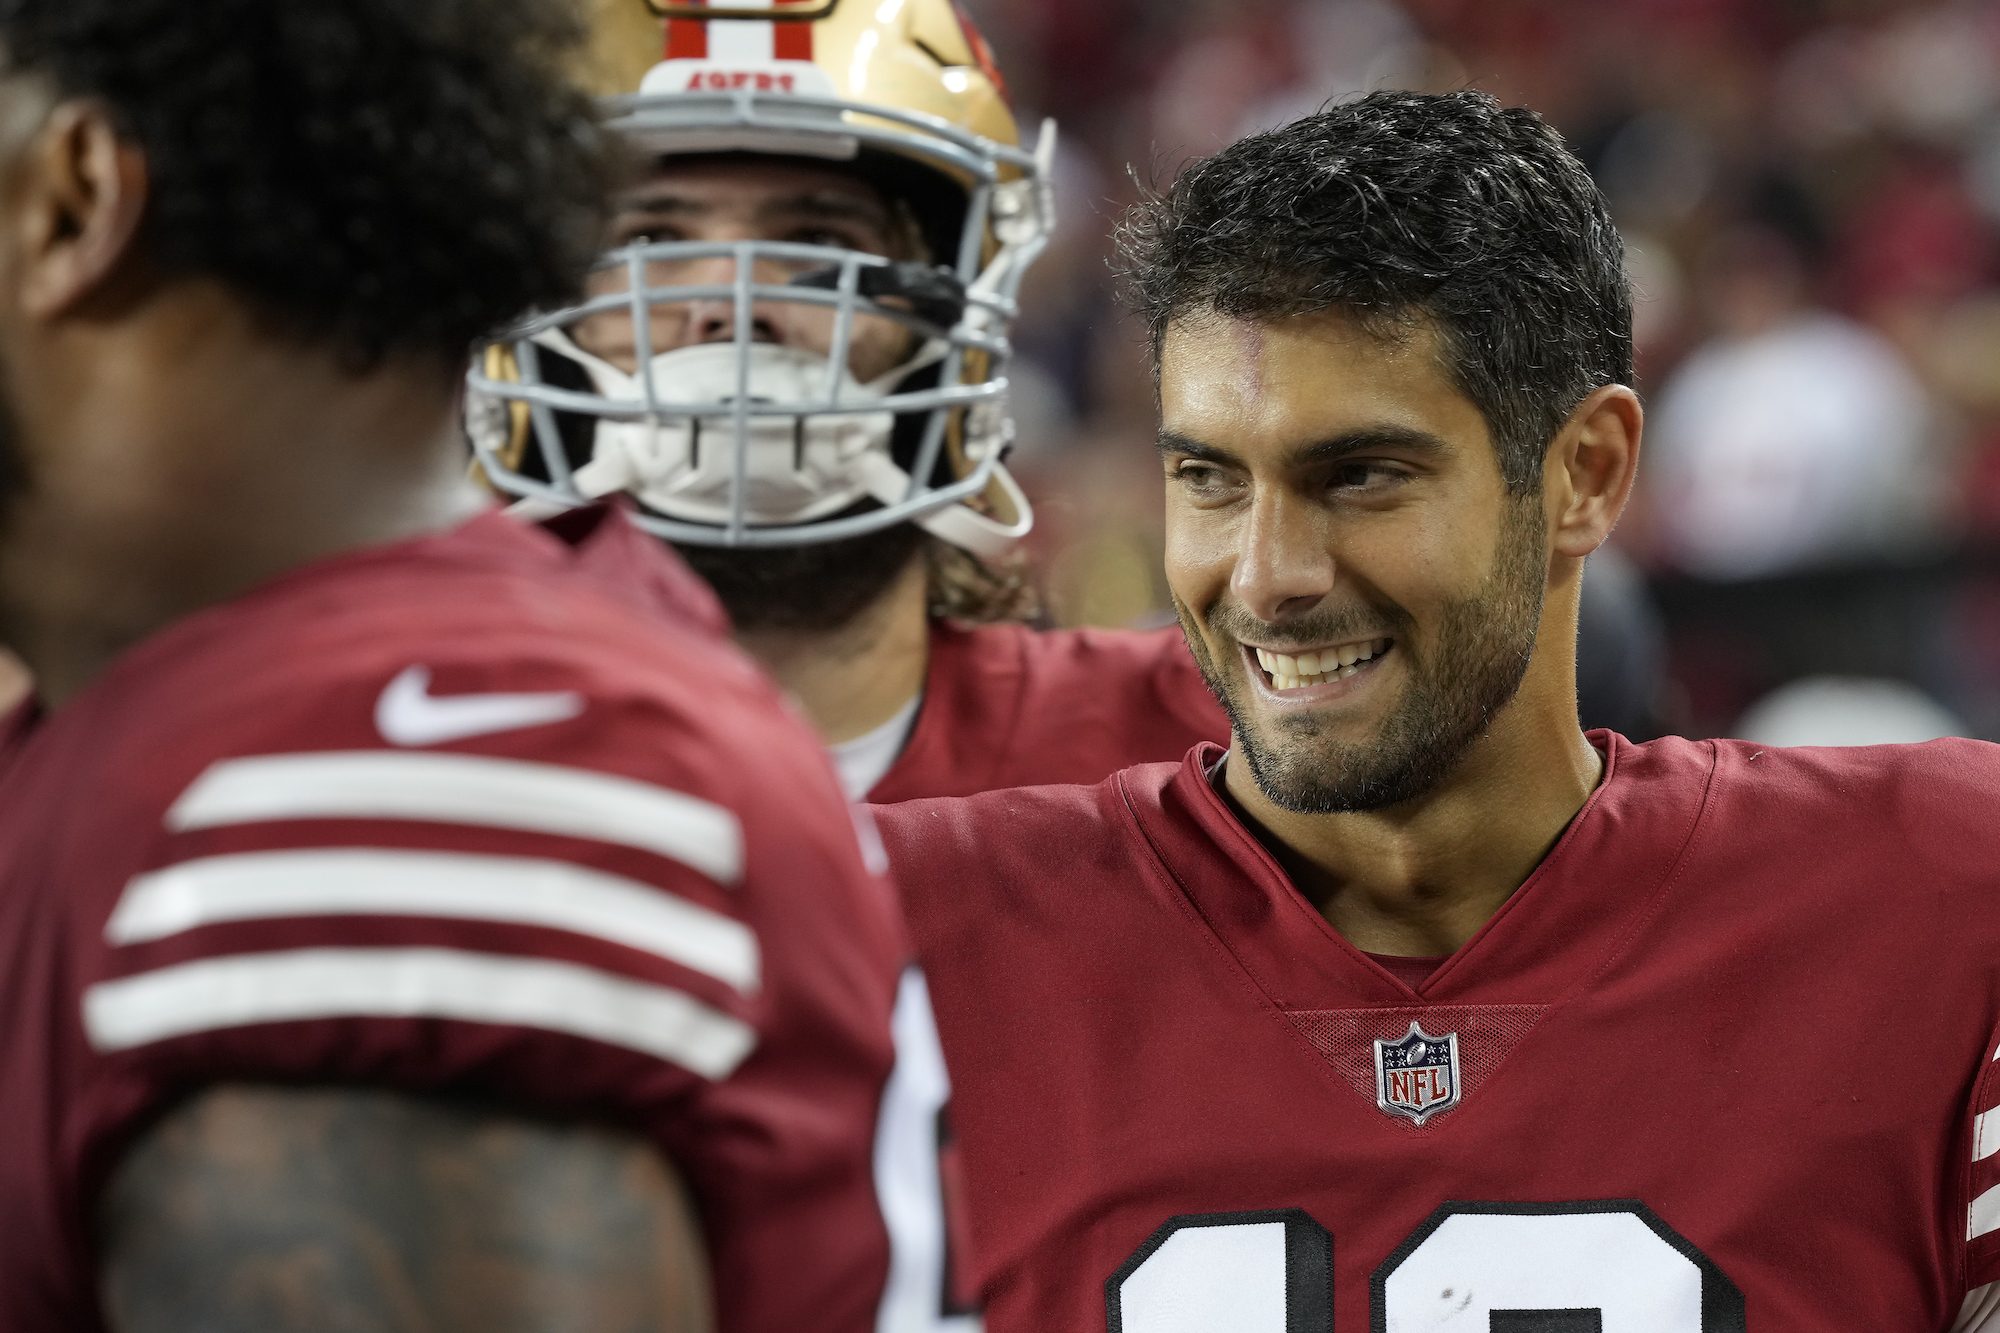 SANTA CLARA, CALIFORNIA - OCTOBER 03: Quarterback Jimmy Garoppolo #10 of the San Francisco 49ers looks on after defeating the Los Angeles Rams at Levi's Stadium on October 03, 2022 in Santa Clara, California. (Photo by Thearon W. Henderson/Getty Images)